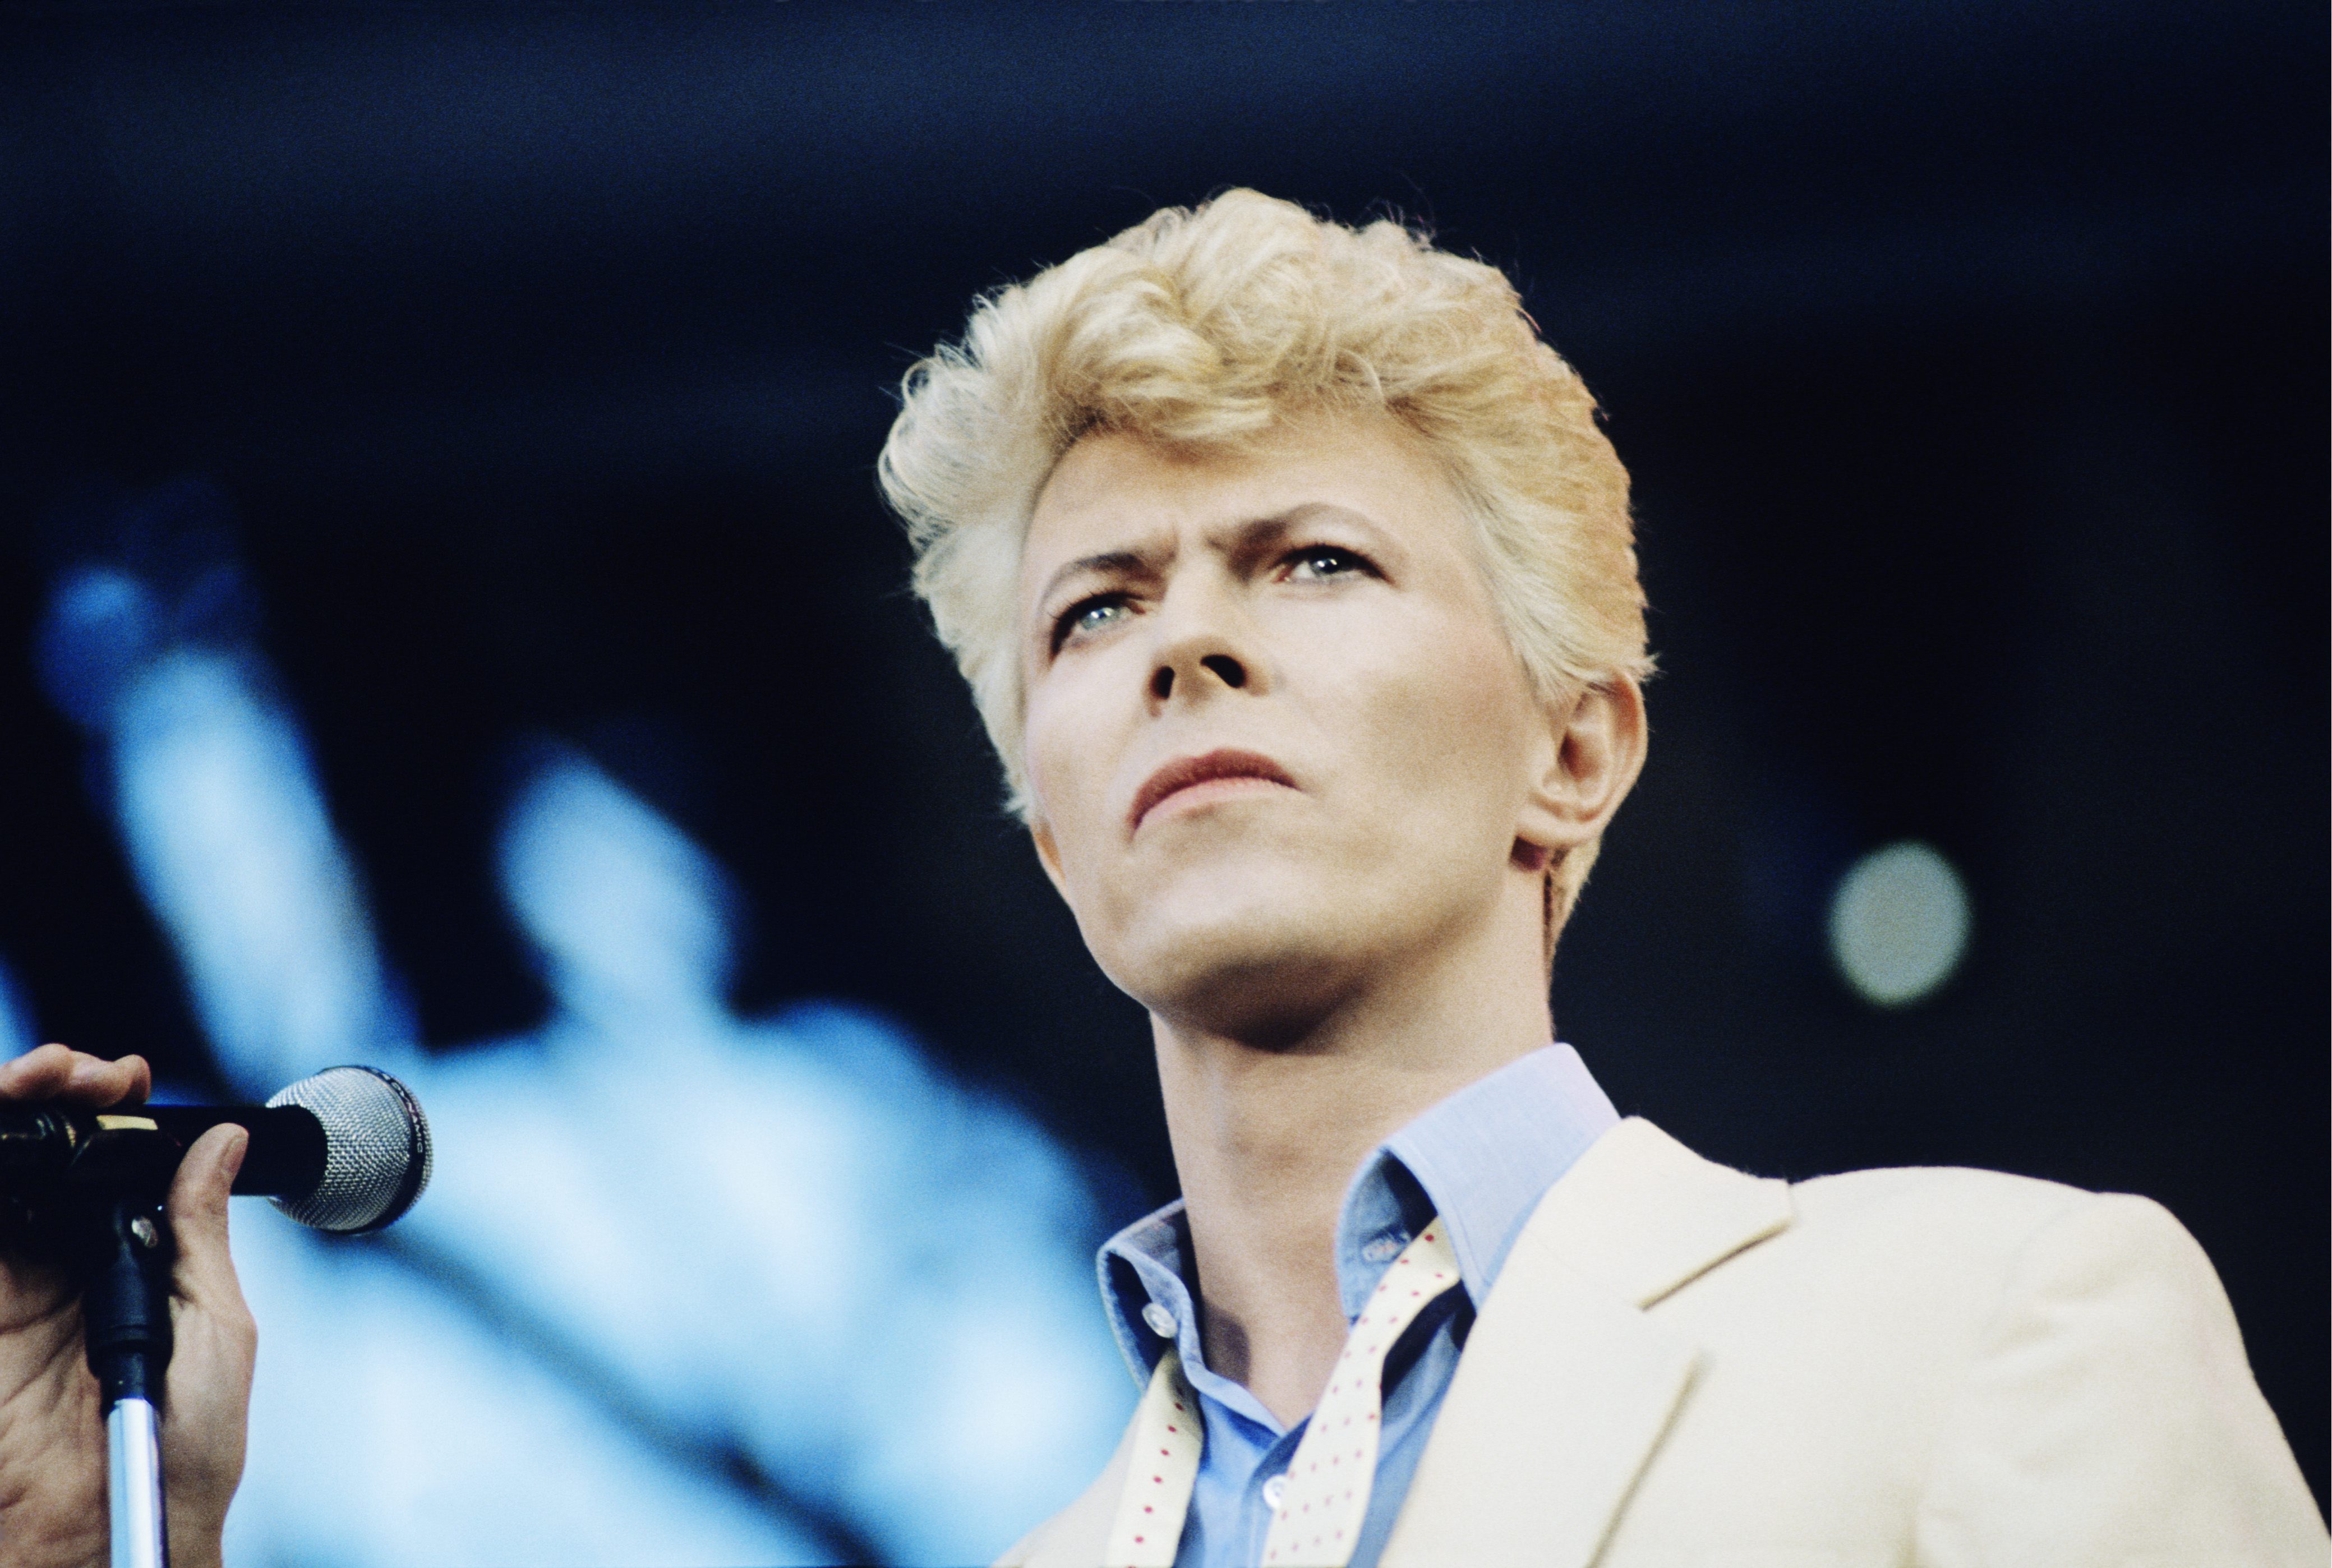 ‘Moonage Daydream’ Trailer Showcases the Colorful World of David Bowie